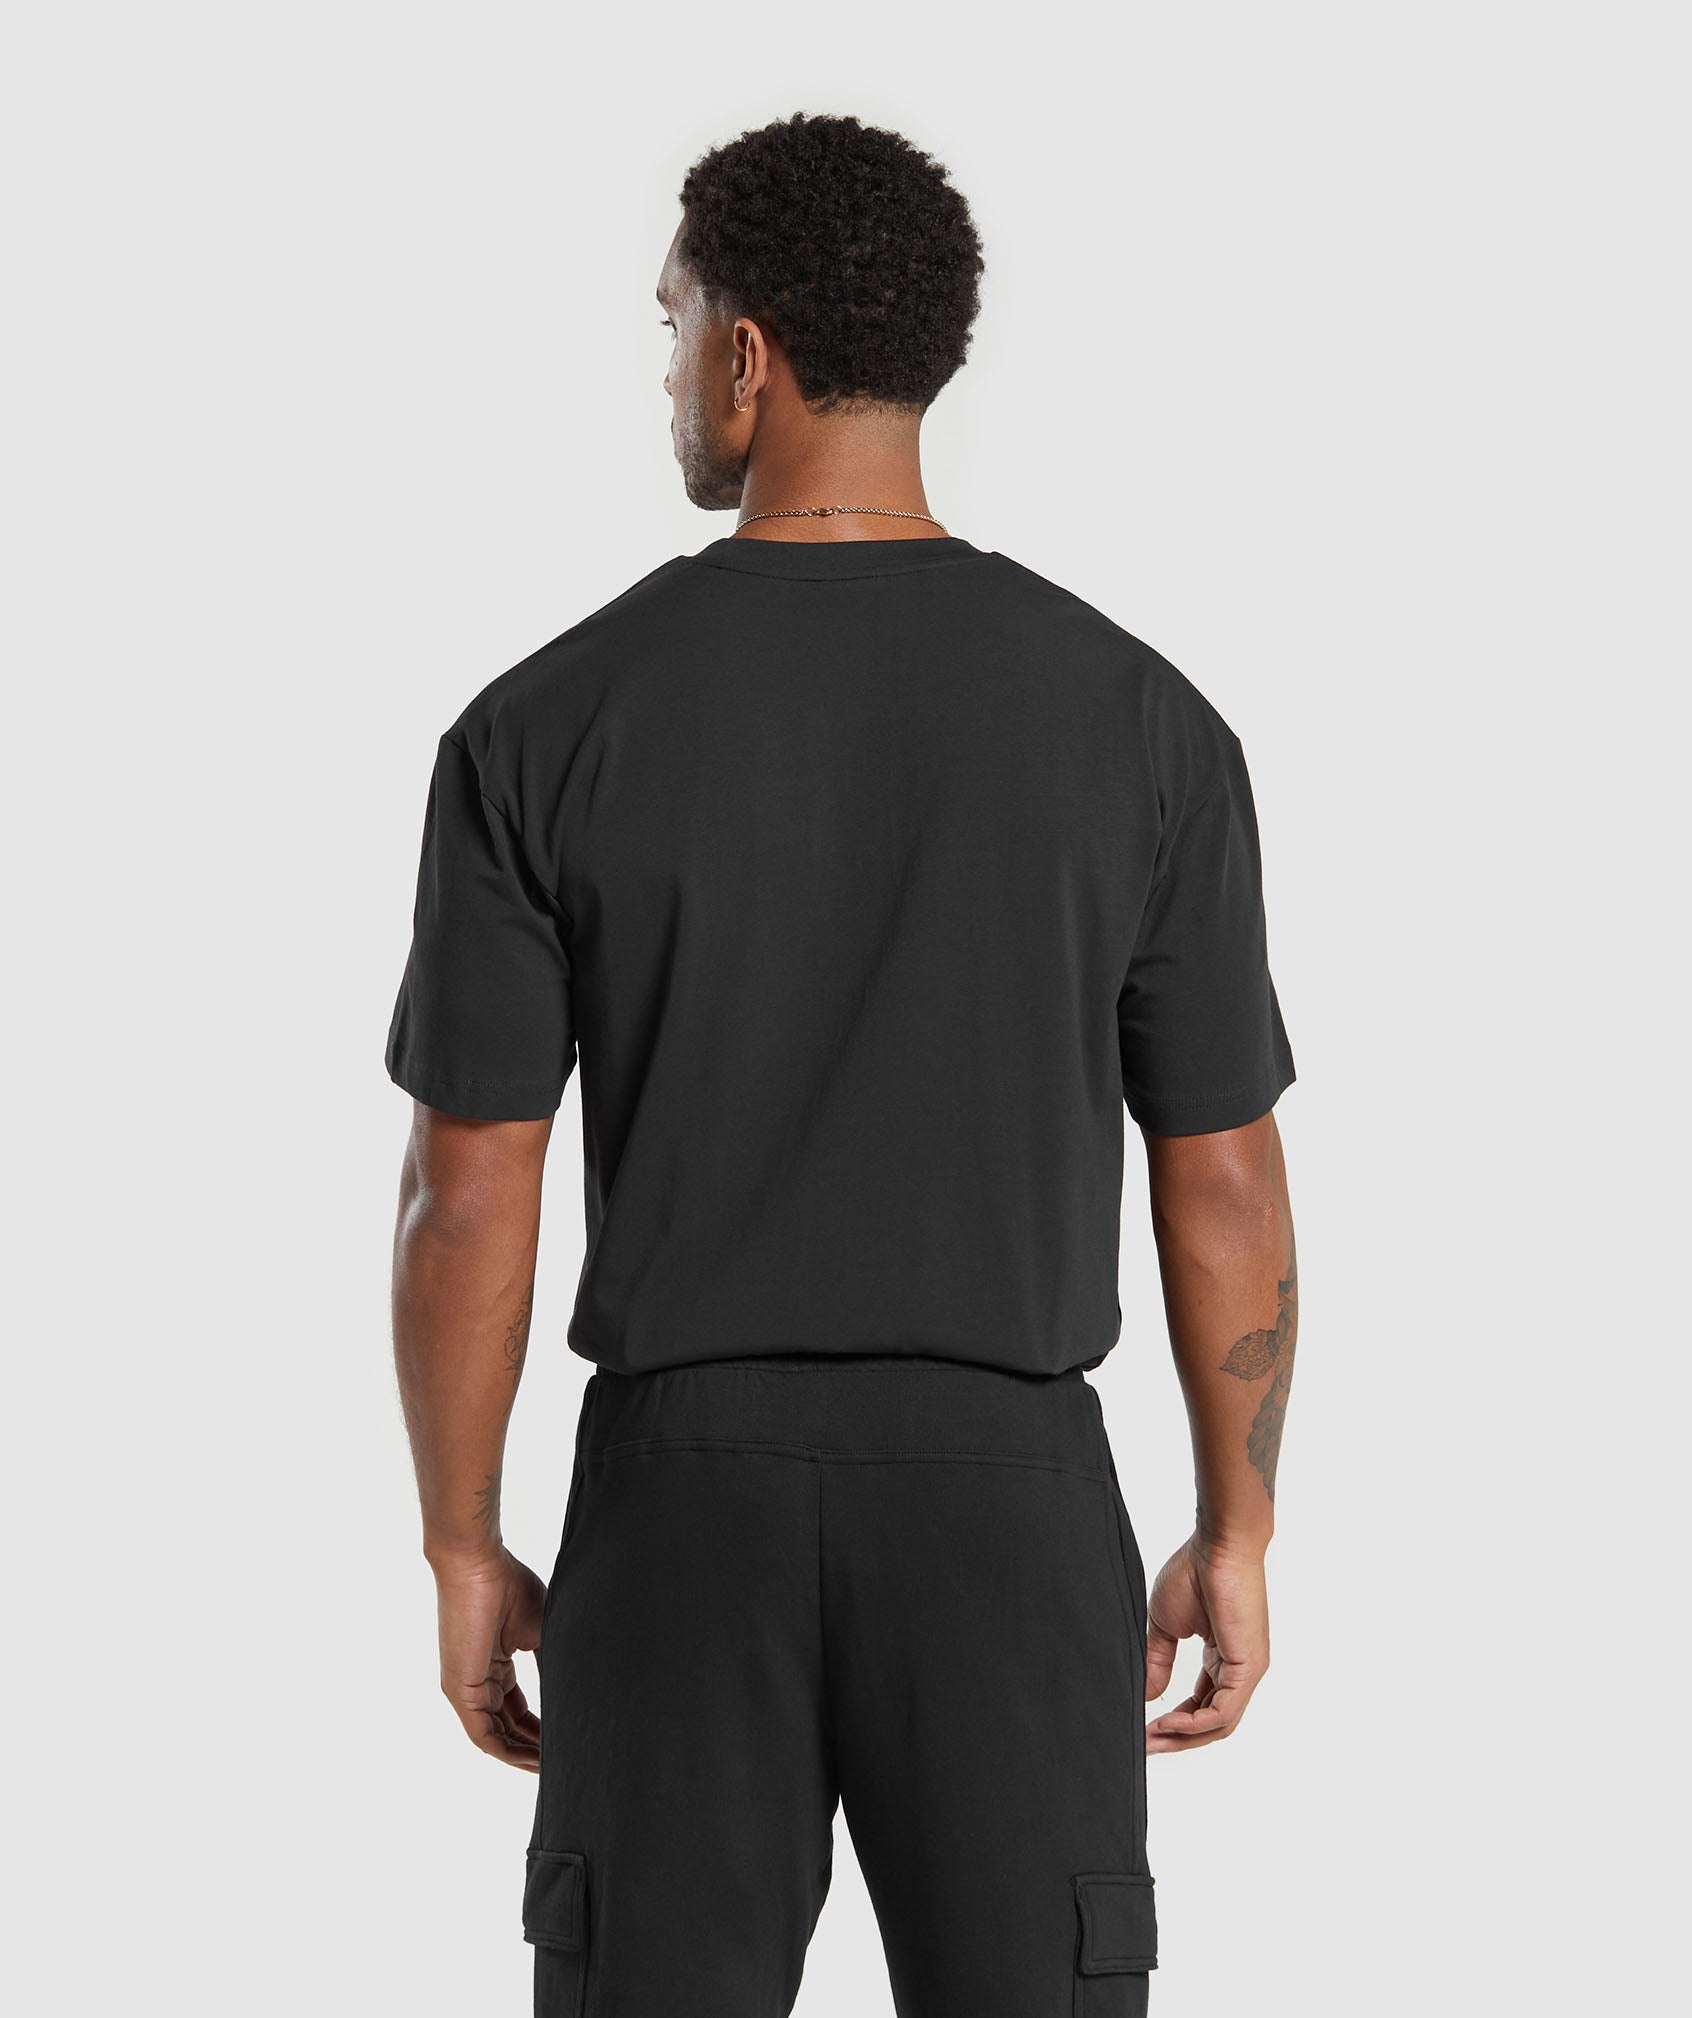 Apollo Oversized T-Shirt in Black - view 2